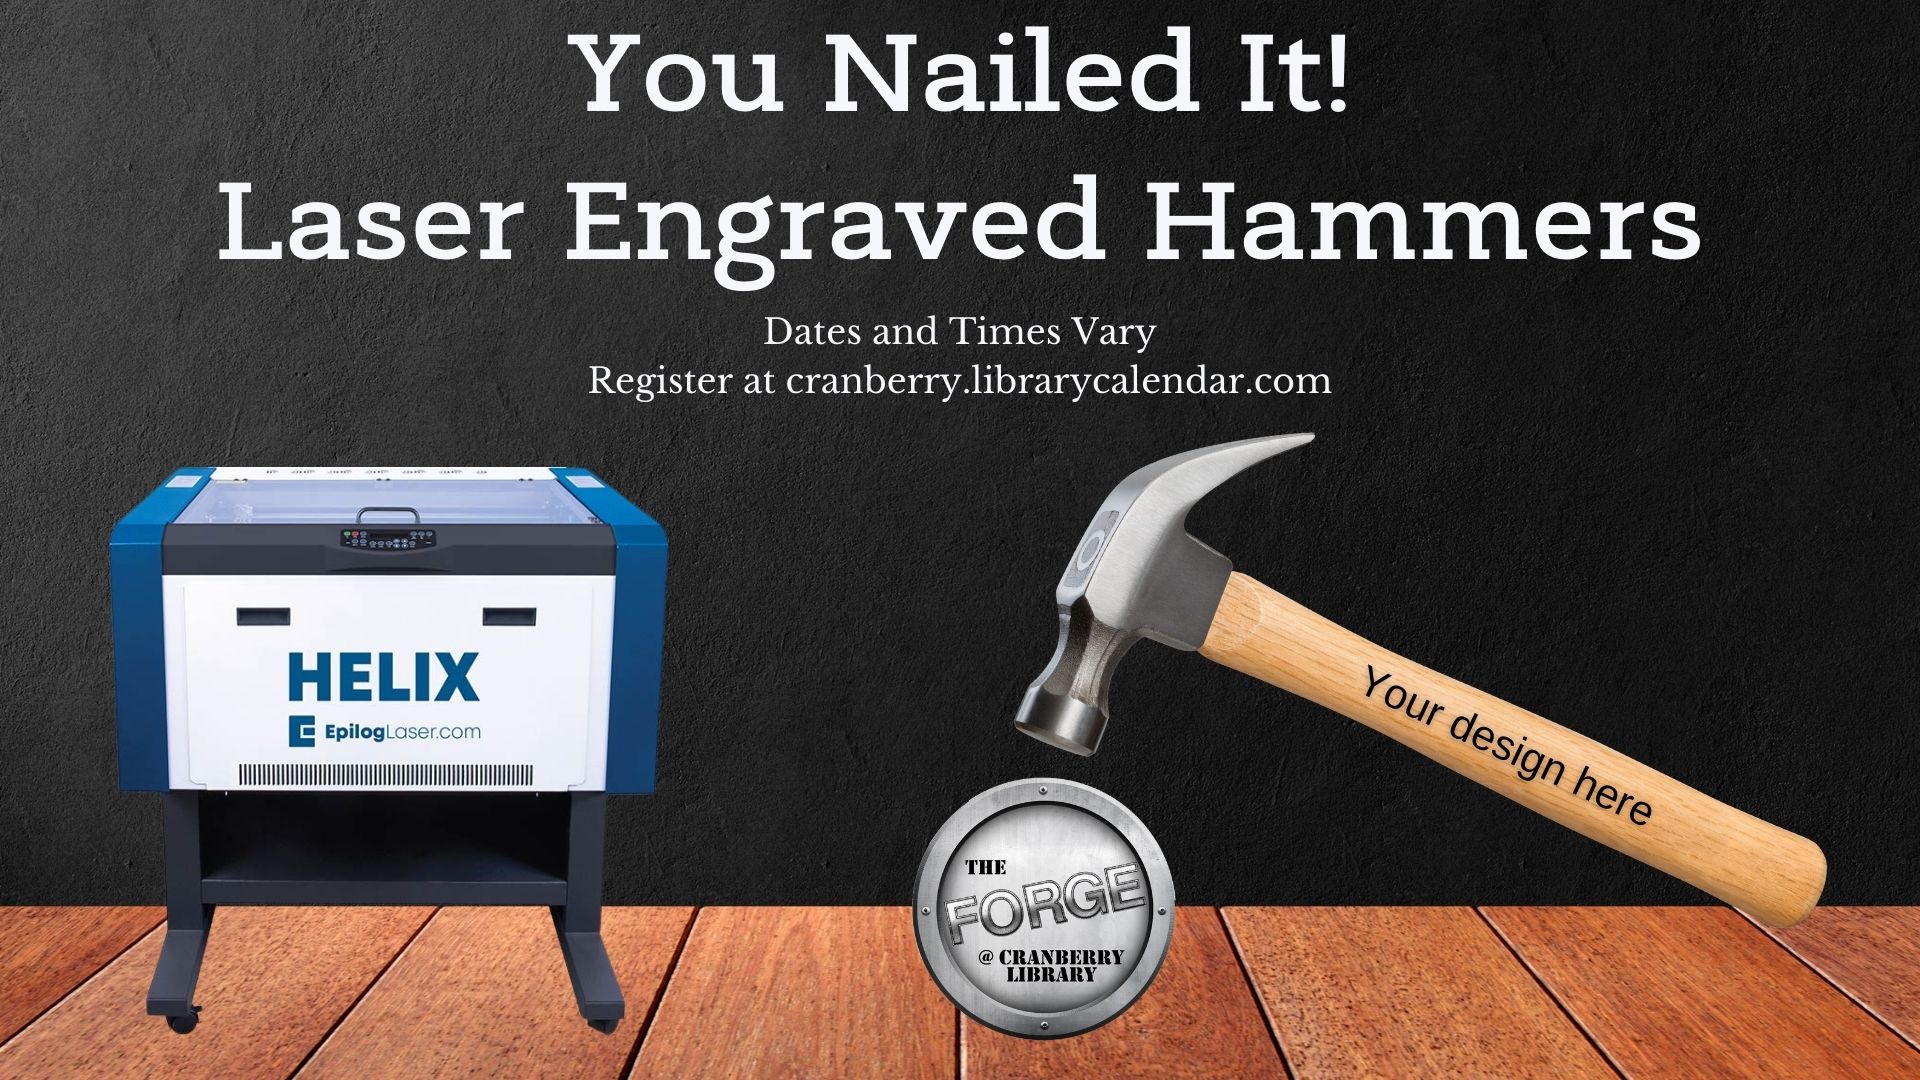 Flyer for Laser Engraved Hammers class